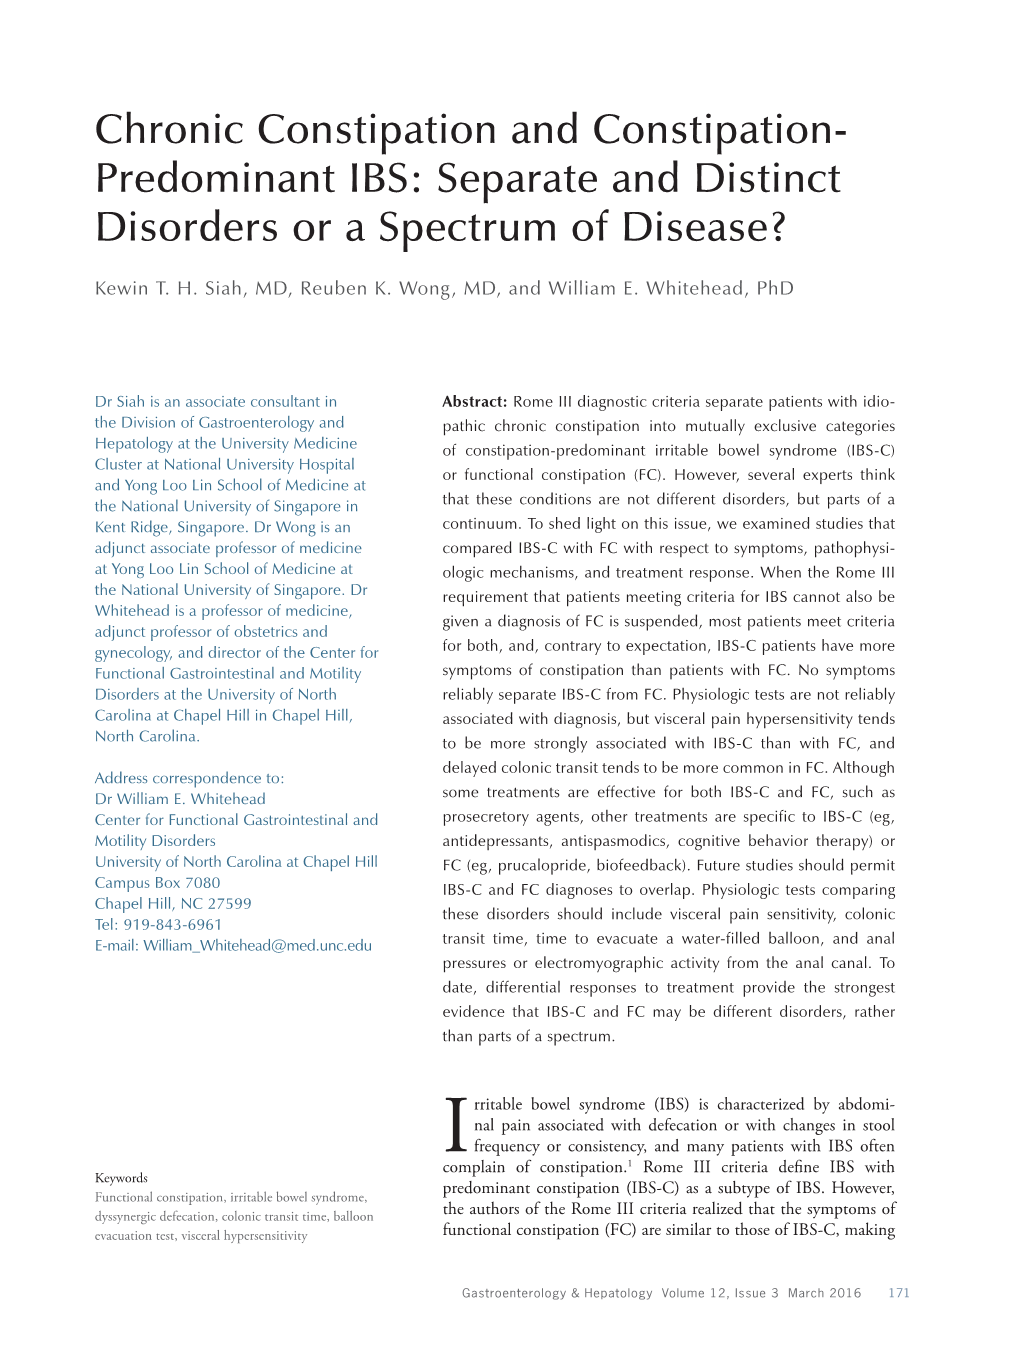 Chronic Constipation and Constipation- Predominant IBS: Separate and Distinct Disorders Or a Spectrum of Disease?